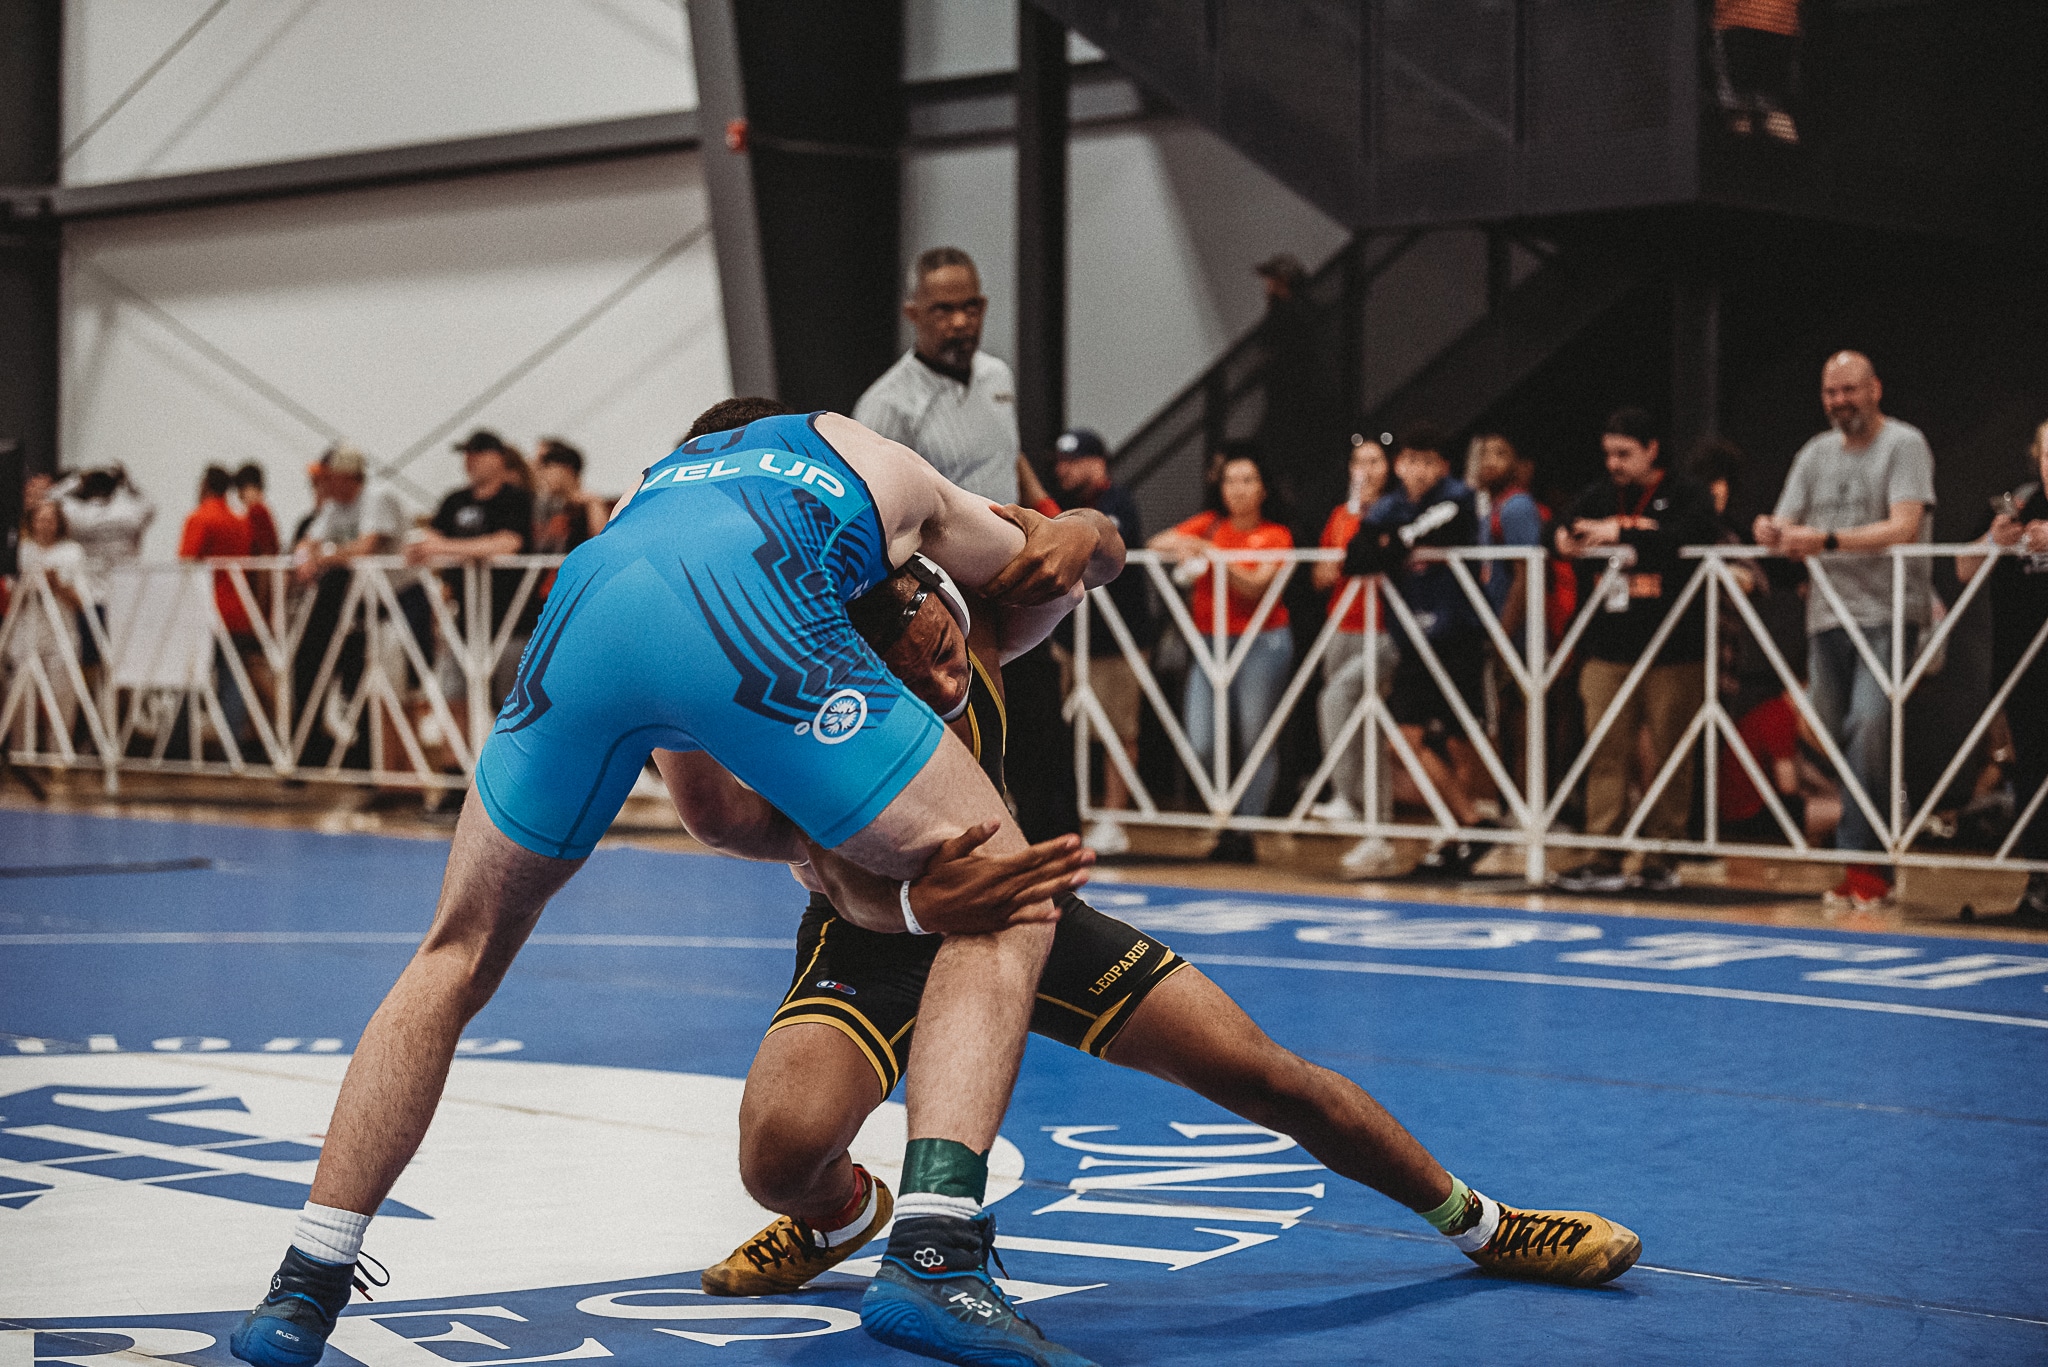 James Gadson looking for a takedown at the 2023 High School National Championship in Virginia Beach, VA.